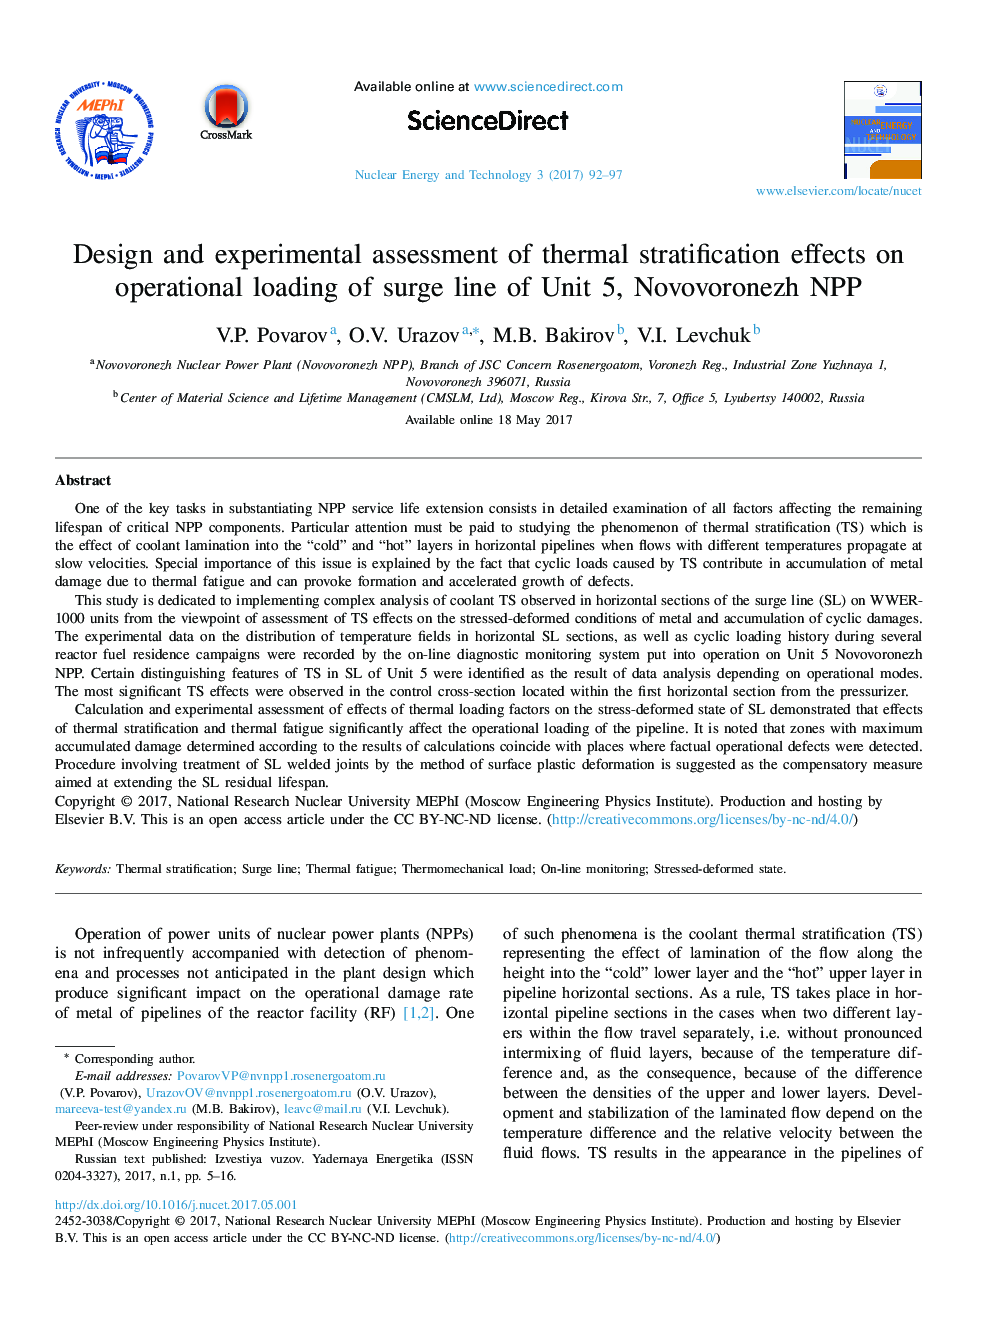 Design and experimental assessment of thermal stratification effects on operational loading of surge line of Unit 5, Novovoronezh NPP